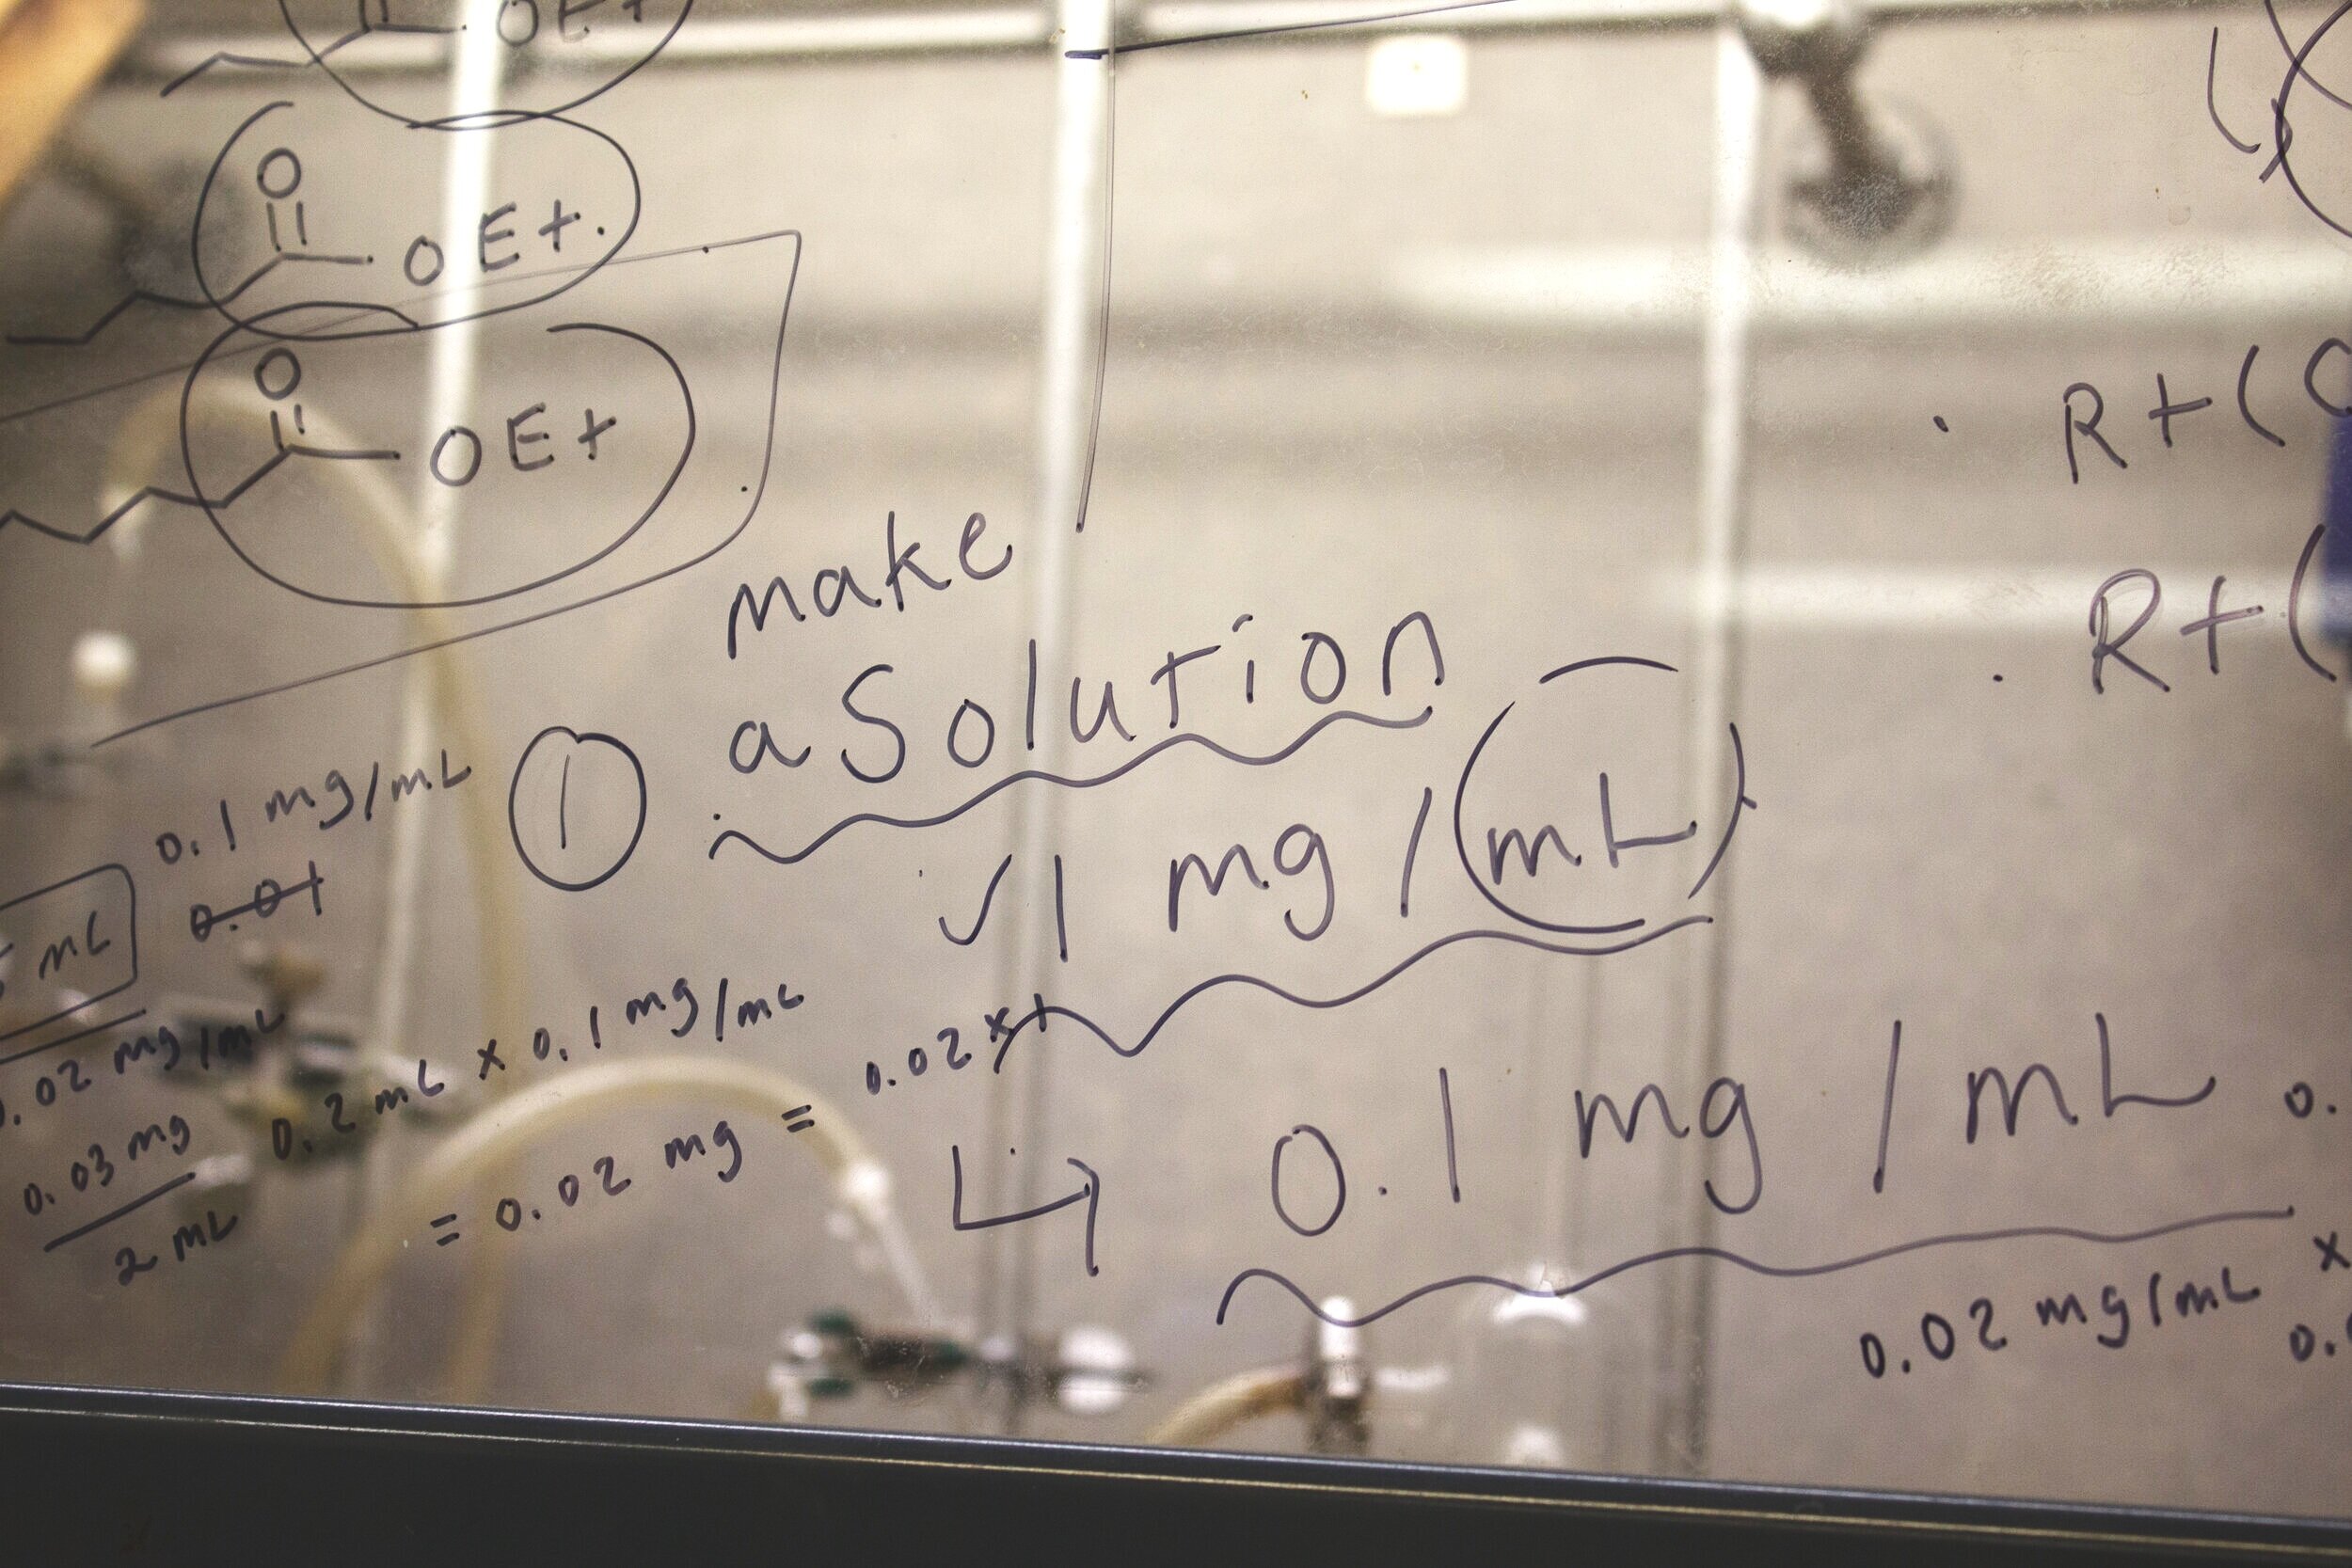 Some notes on a laboratory protocol written on a marker board. 